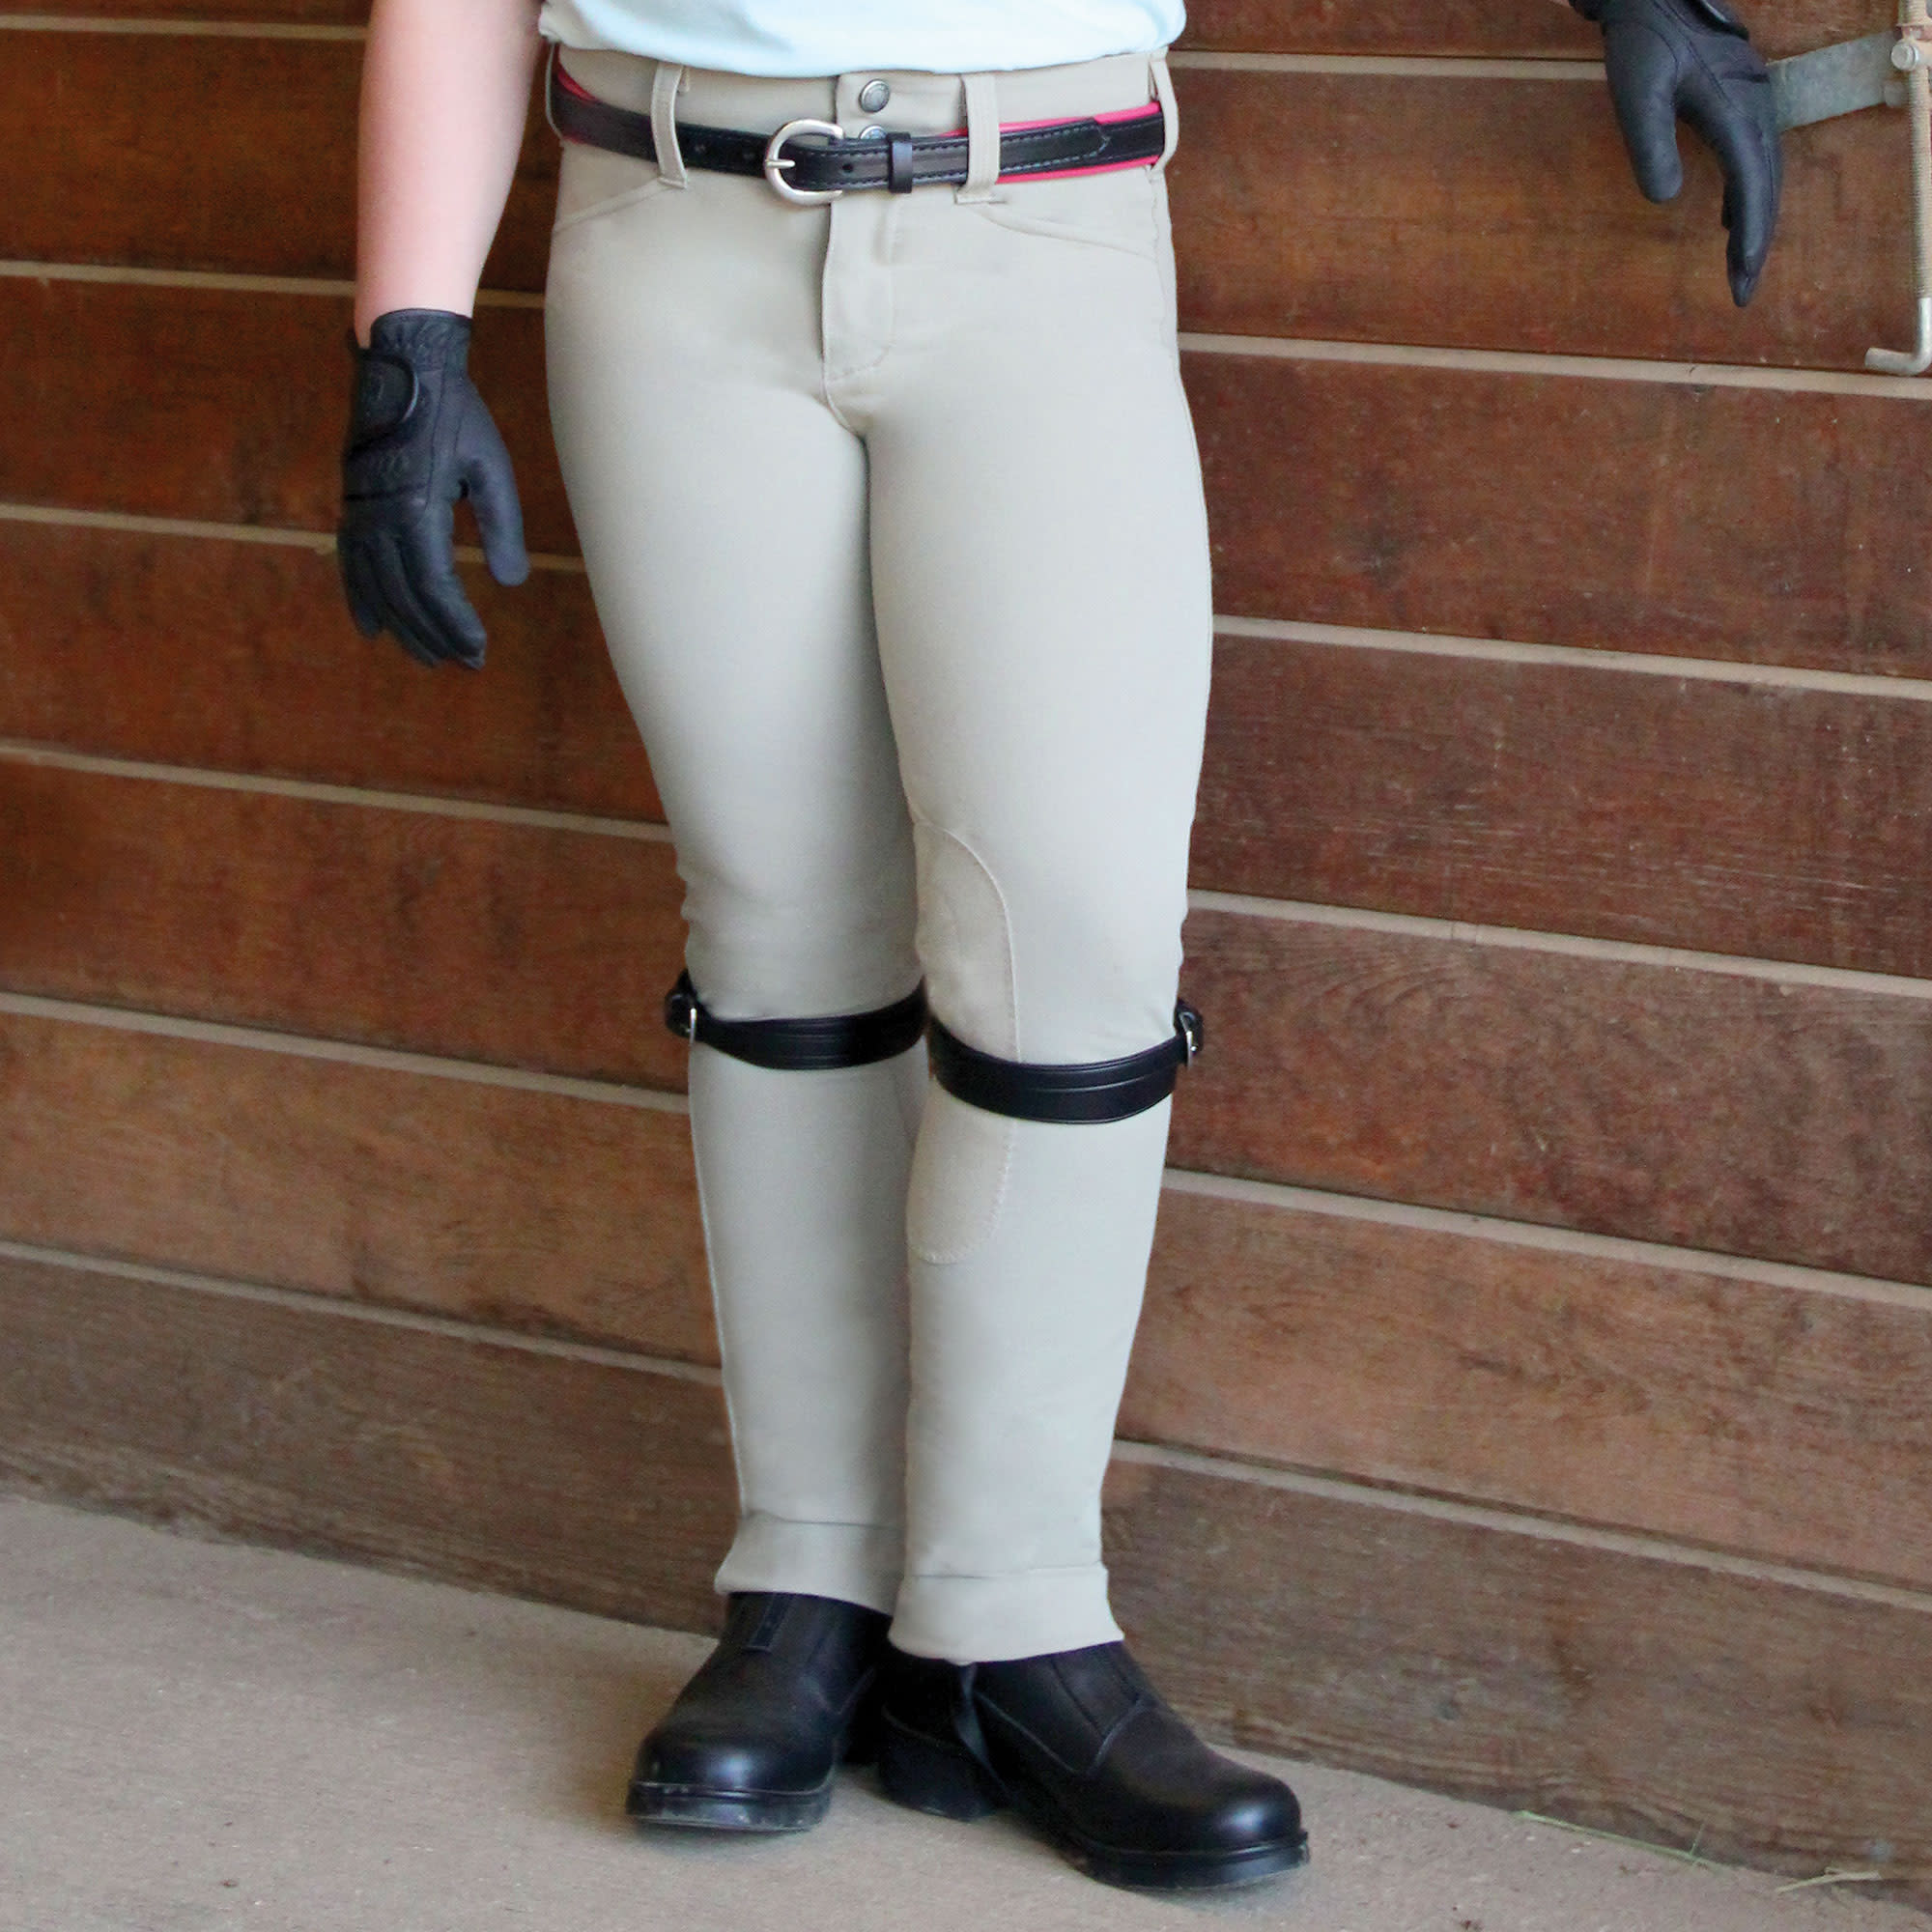 Irideon Children's Hampshire Riding Tights with 2" Waistband and Euro Seat Lines 